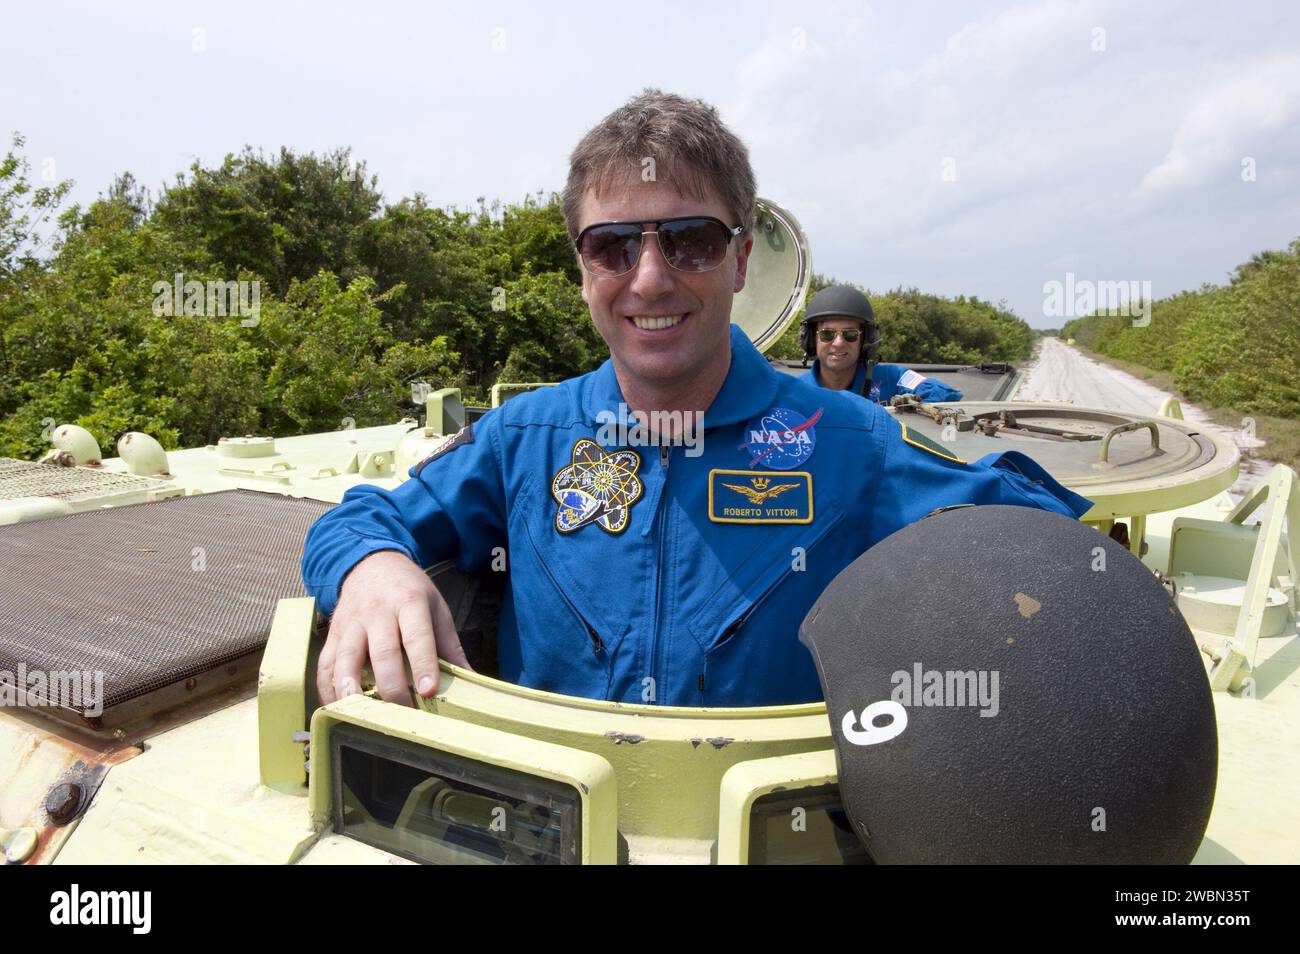 CAPE CANAVERAL, Fla. - Astronaut and Mission Specialist Roberto Vittori with the European Space Agency takes time out from driving practice of the M113 armored personnel carrier to pose for a photo at NASA's Kennedy Space Center in Florida. An M113 is kept at the foot of the launch pad in case an emergency exit from the pad is needed and every shuttle crew is trained on driving the vehicle before launch.        Space shuttle Endeavour's six crew members are at Kennedy for the launch countdown dress rehearsal called the Terminal Countdown Demonstration Test (TCDT) and related training. Targeted Stock Photo